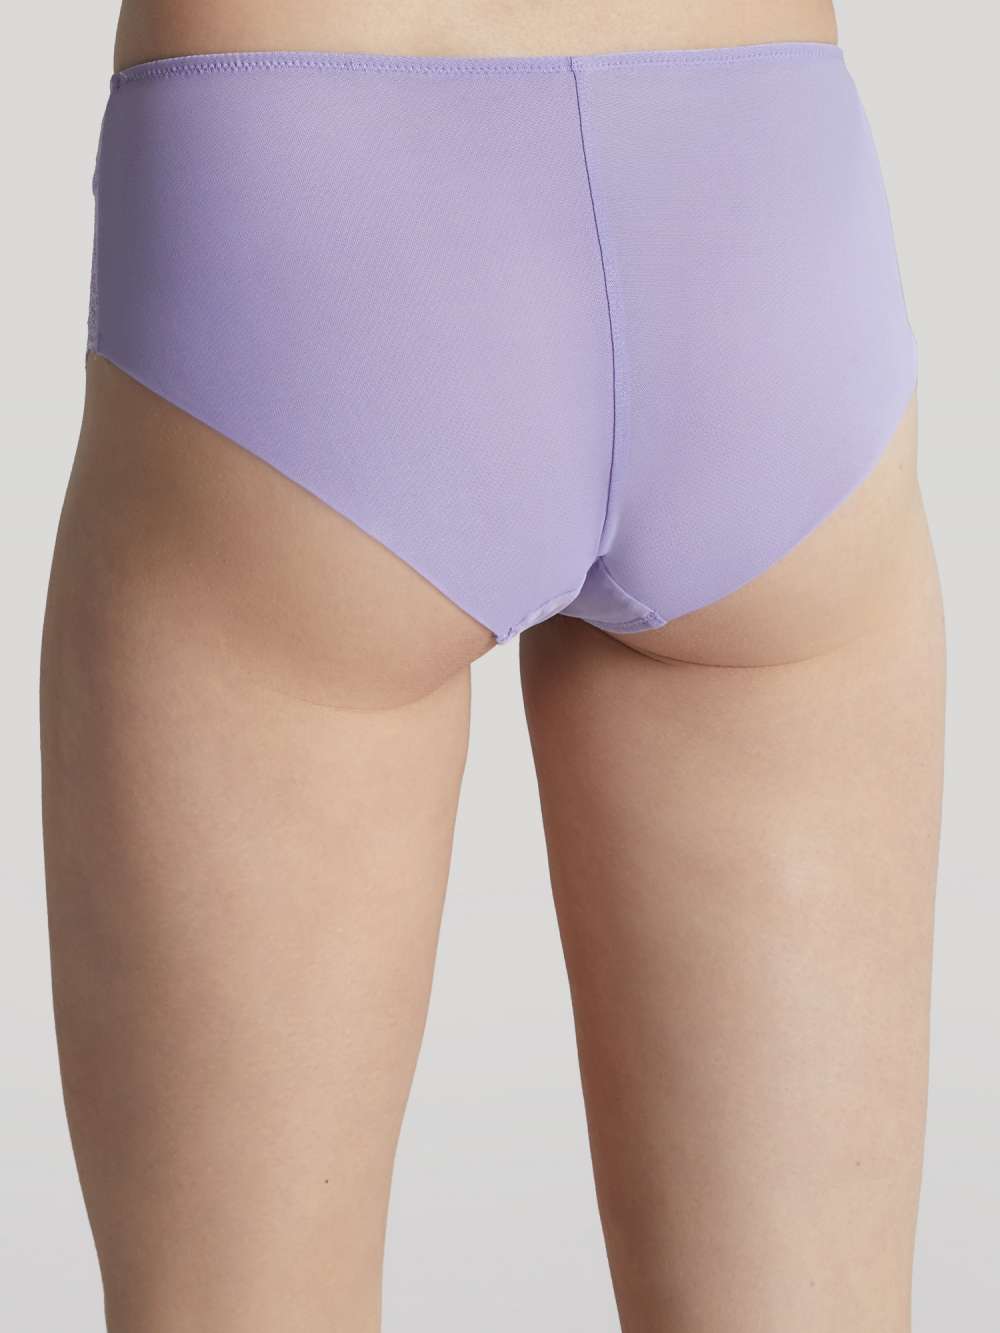 Ana Brief - Sweet Lavender worn by model, back view